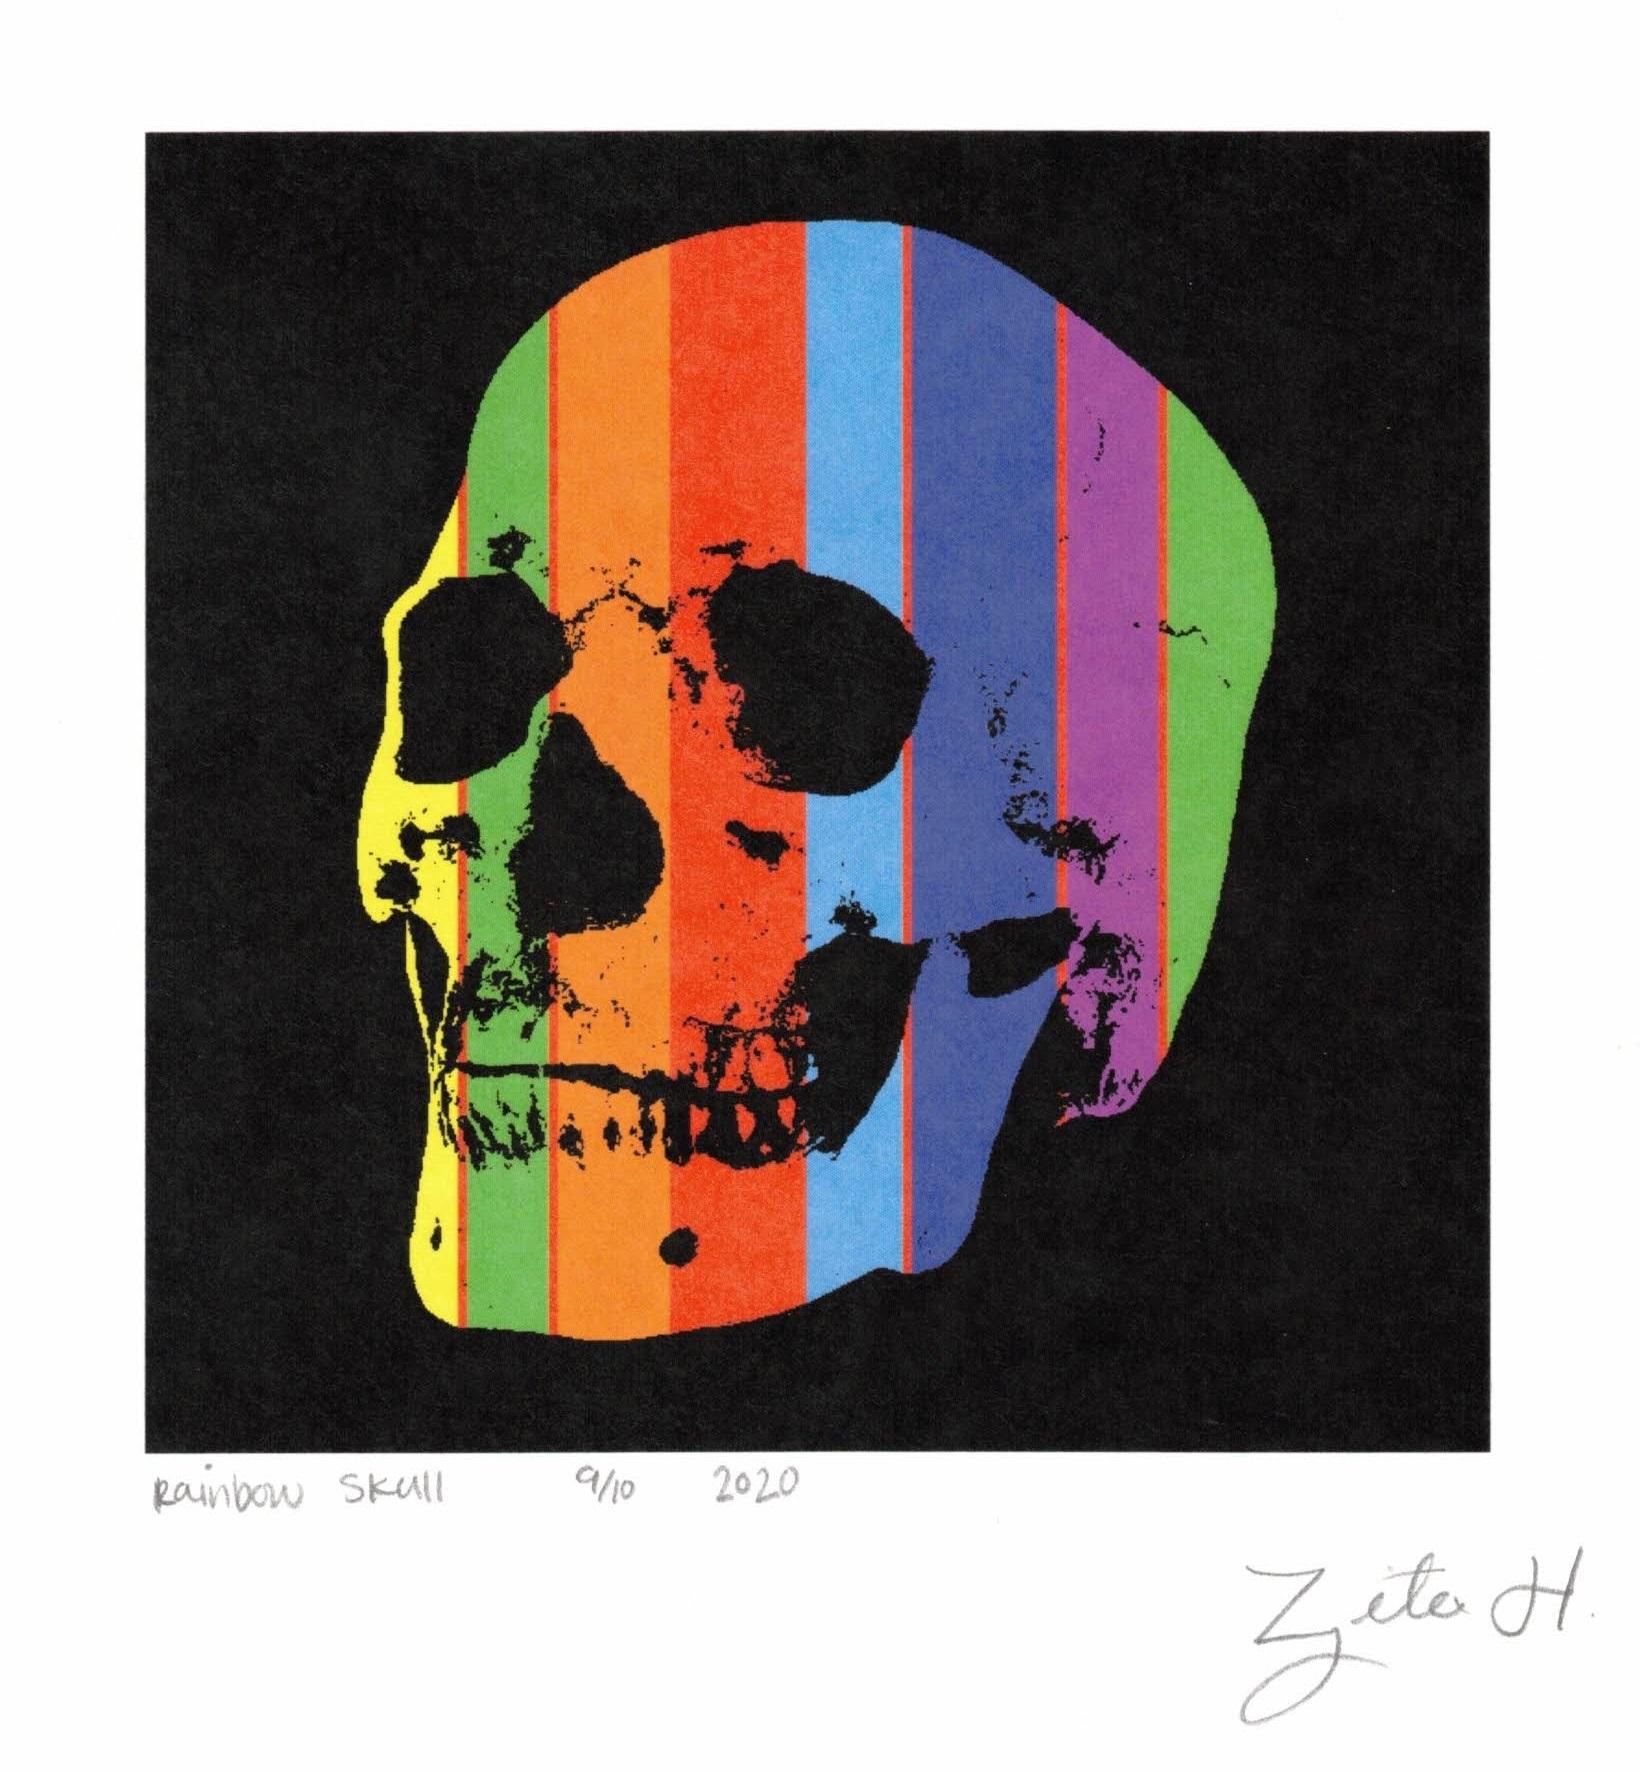 Zita Hastings, American, b.1996

Rainbow Skull, 9/10, Print Year: 2020, Printed on 11x8.5 inch card stock, image size is approx 4.5x4.5 inches. Hand Signed in Pencil.

Artist Biography:
Zita Hastings is an American artist of Native American, Mexican